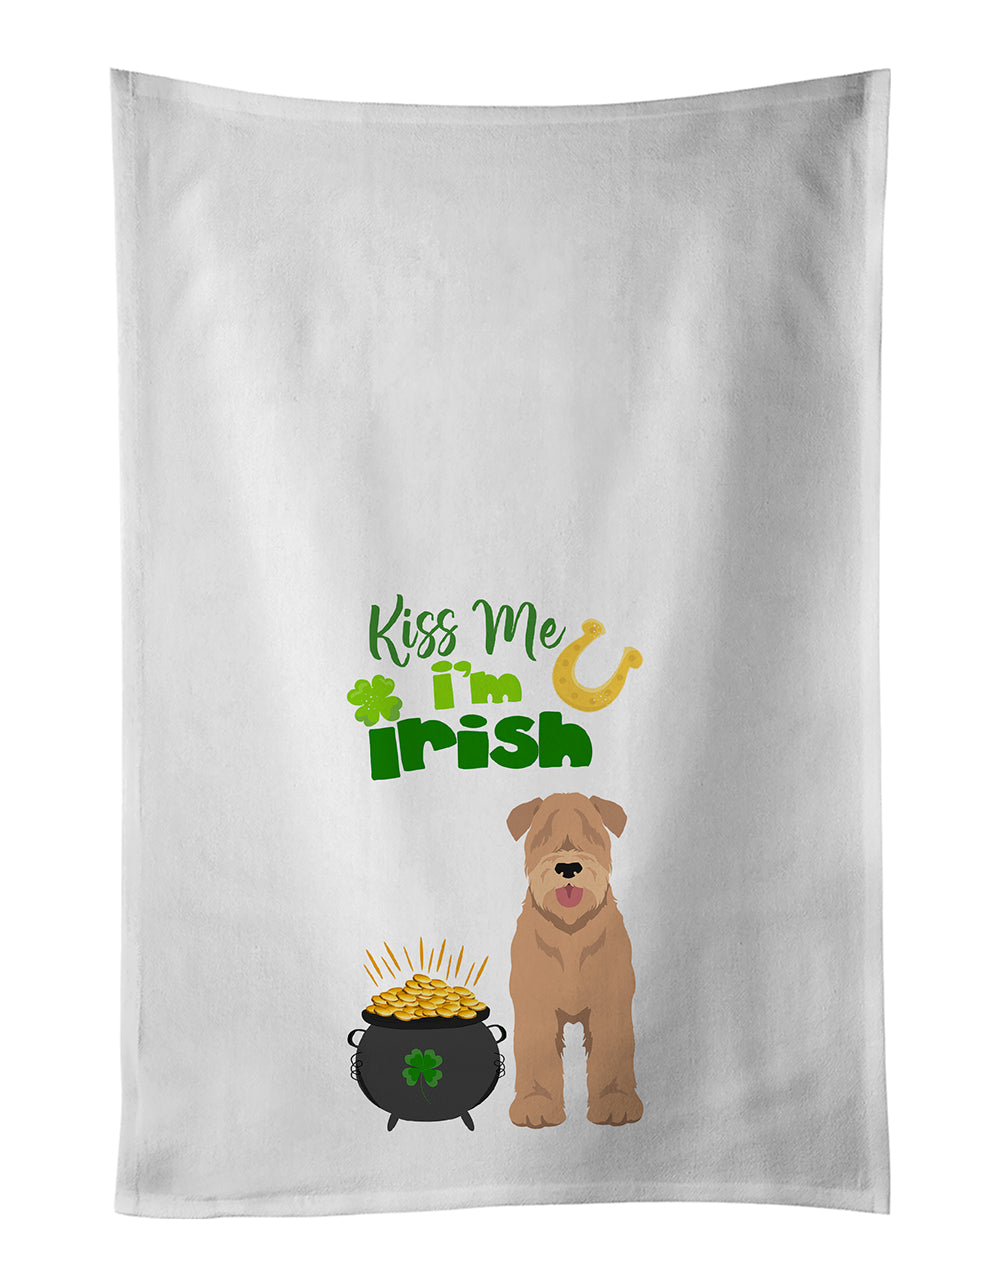 Buy this Red Wheaten Terrier St. Patrick's Day White Kitchen Towel Set of 2 Dish Towels